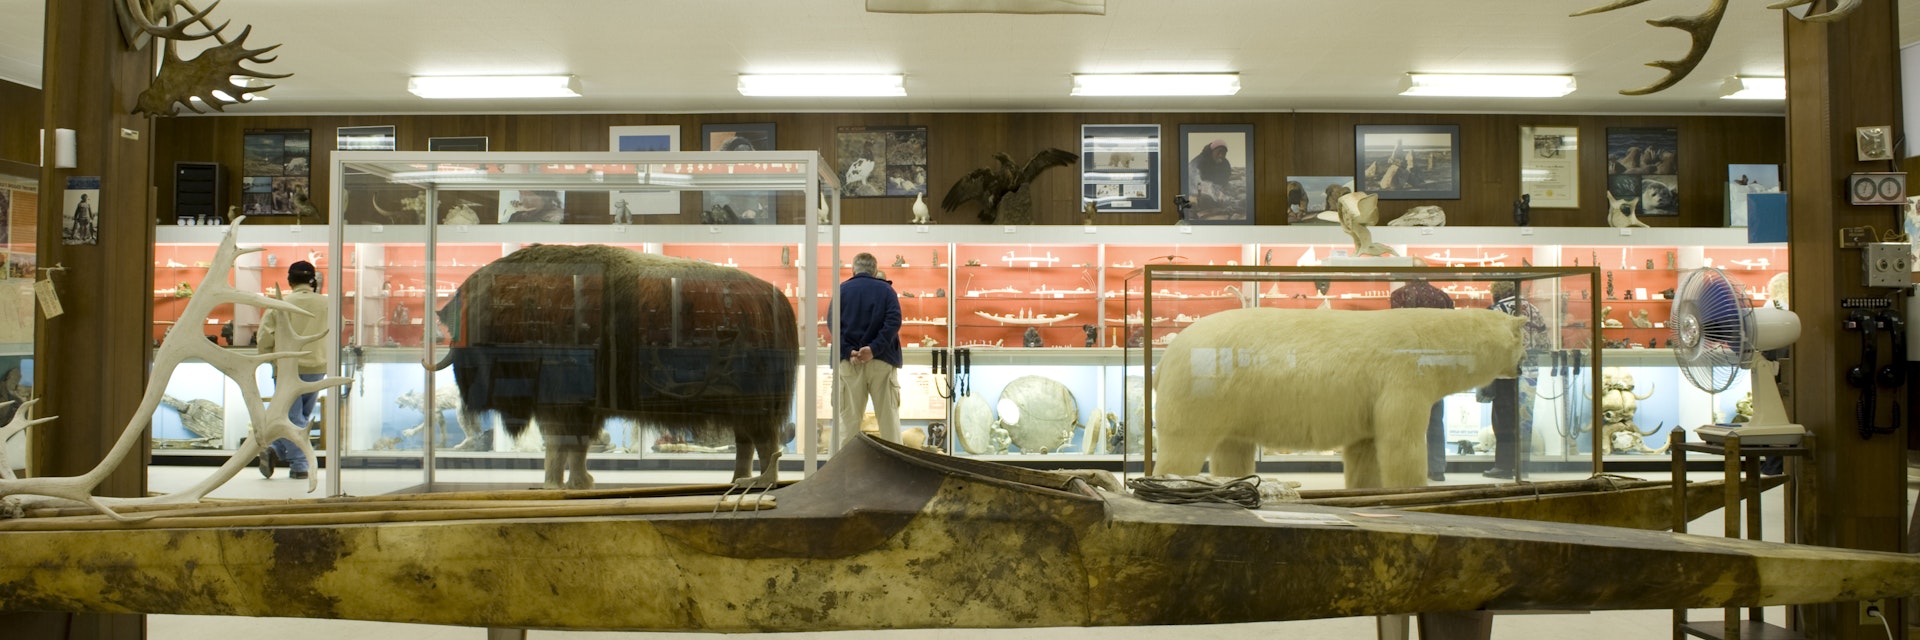 The Eskimo Museum in Churchill, Canada. The town is known as the .Polar Bear capital of the world.